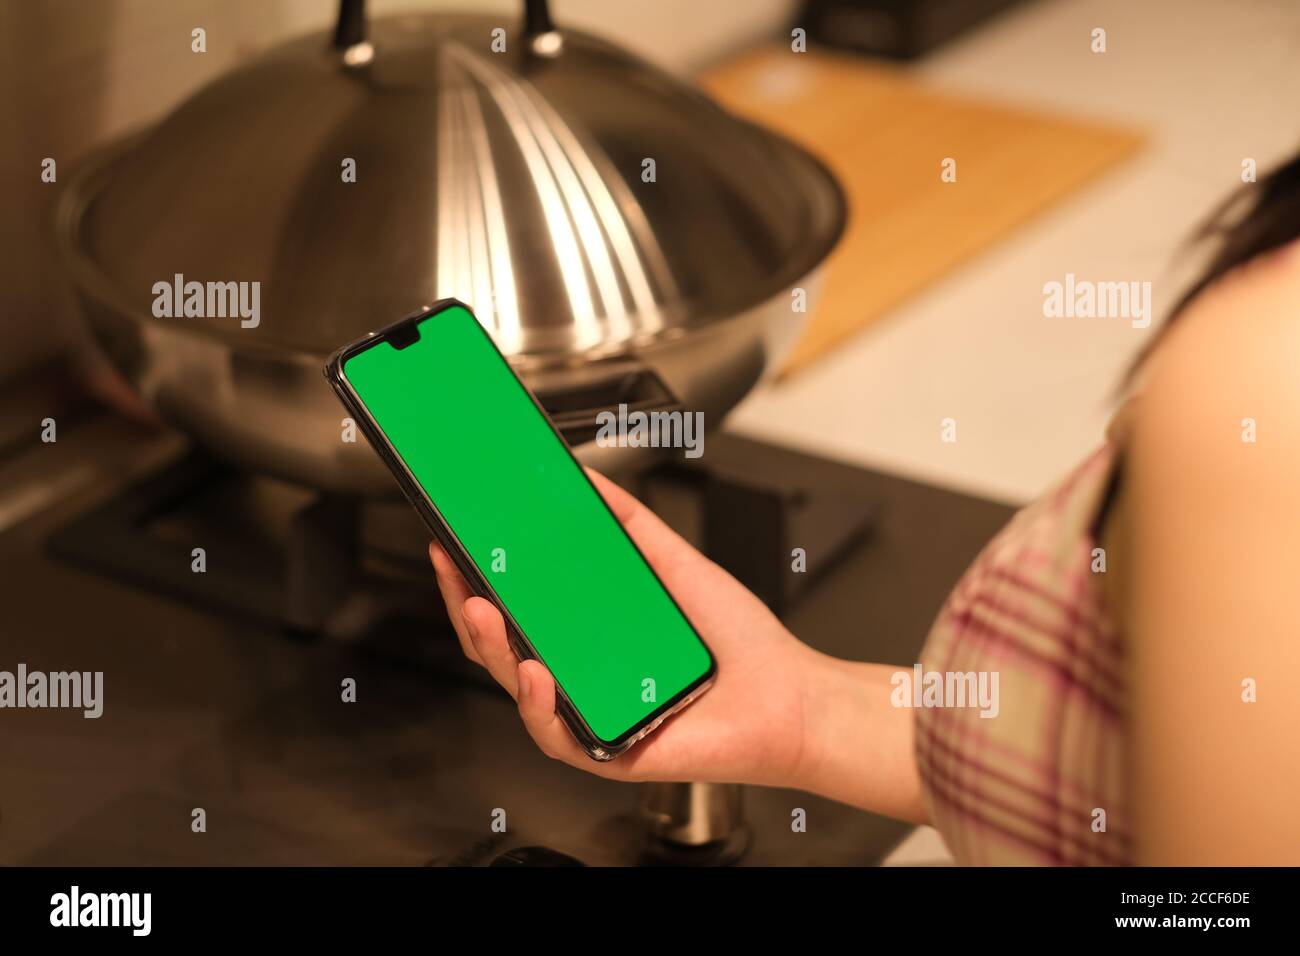 over shoulder view of woman holding green screen phone in kitchen. Stock Photo